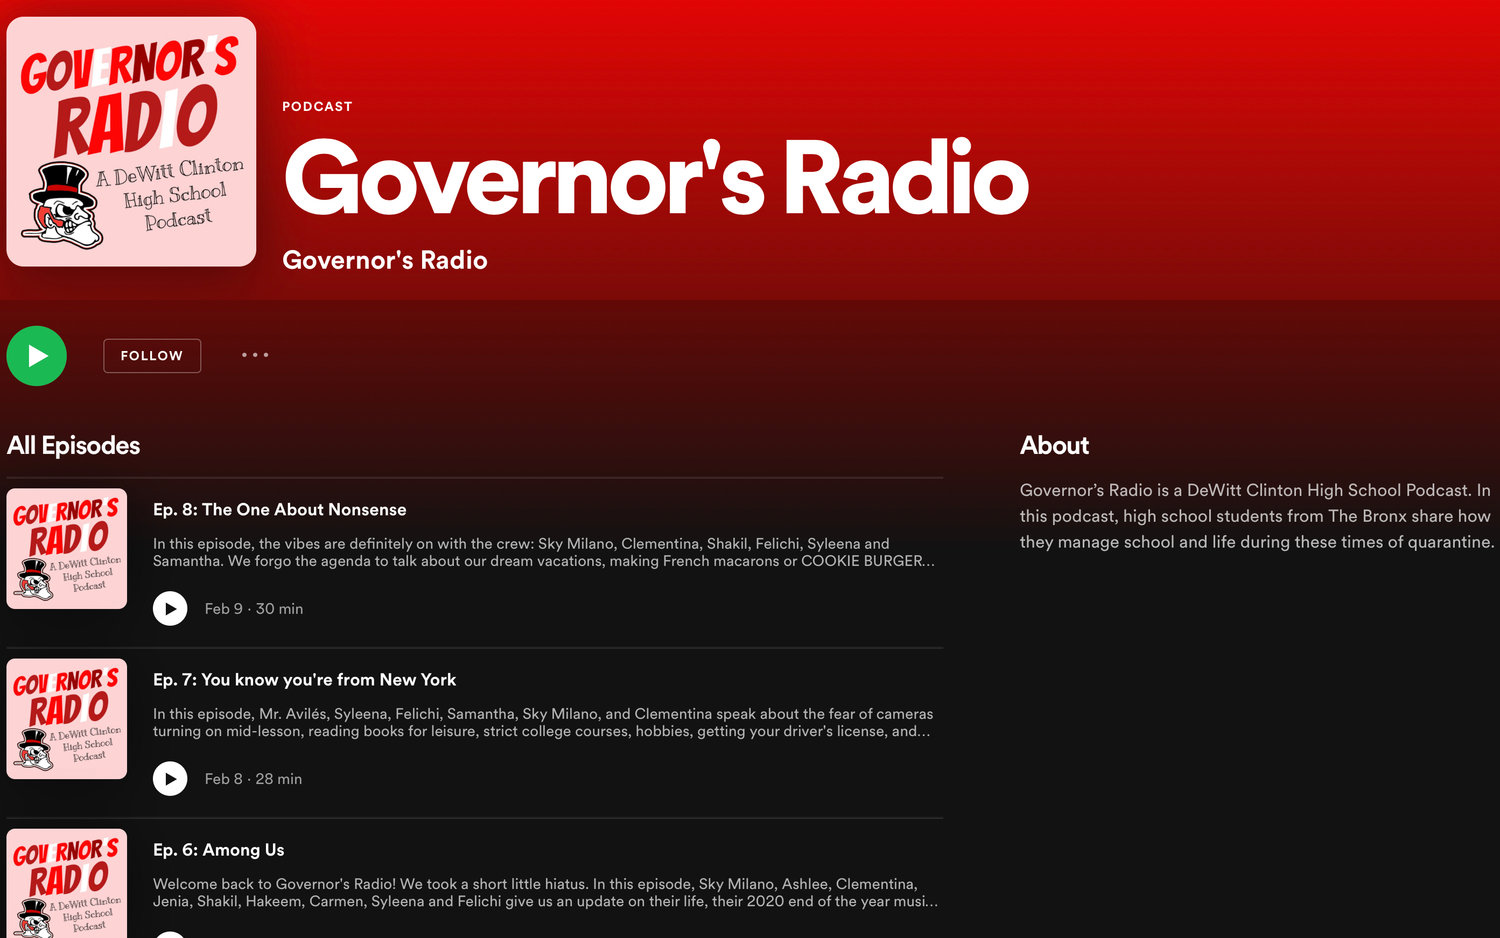 Governor’s Radio — the product of DeWitt Clinton High School’s newest club — is available on major streaming platforms like Spotify and Apple Podcasts. Many of the student broadcasters say they are excited about the wide reach their work could have both now and in the future.